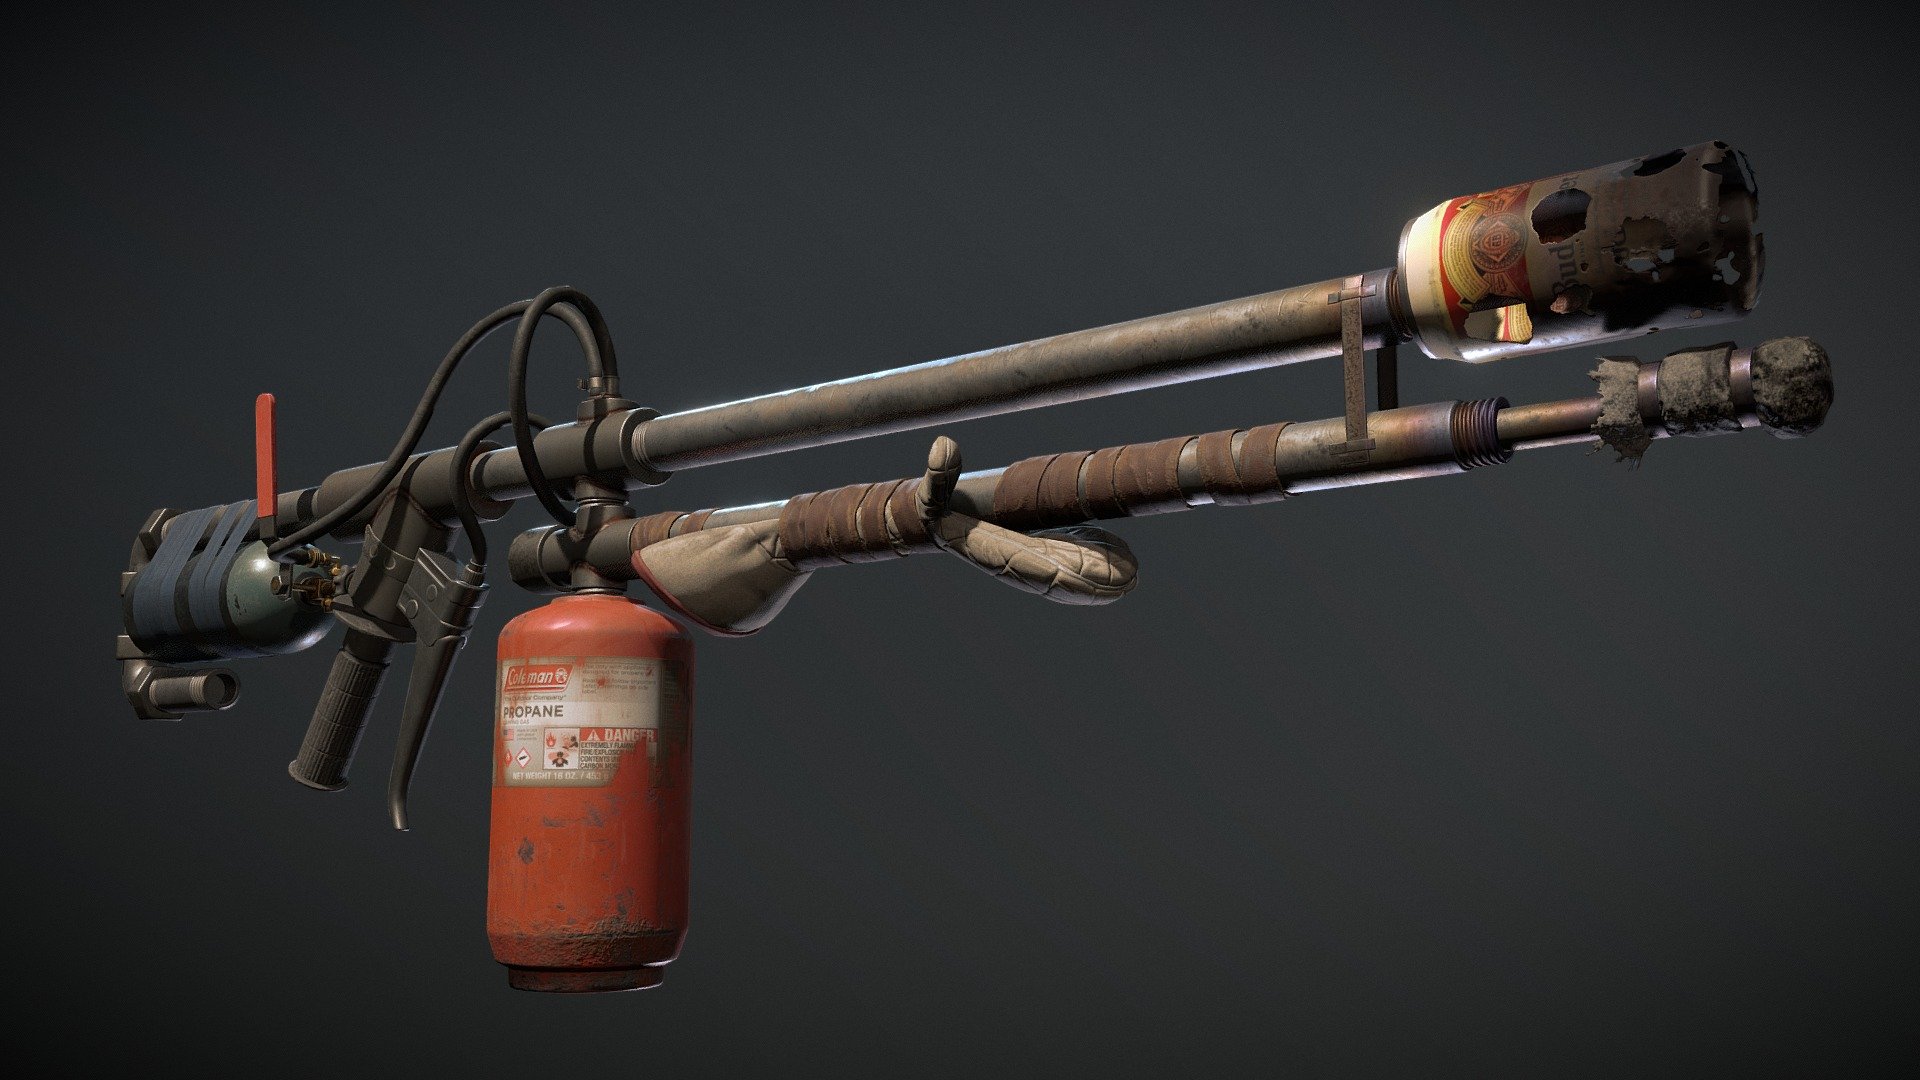 Flamethrower from the game &ldquo;The Last of Us